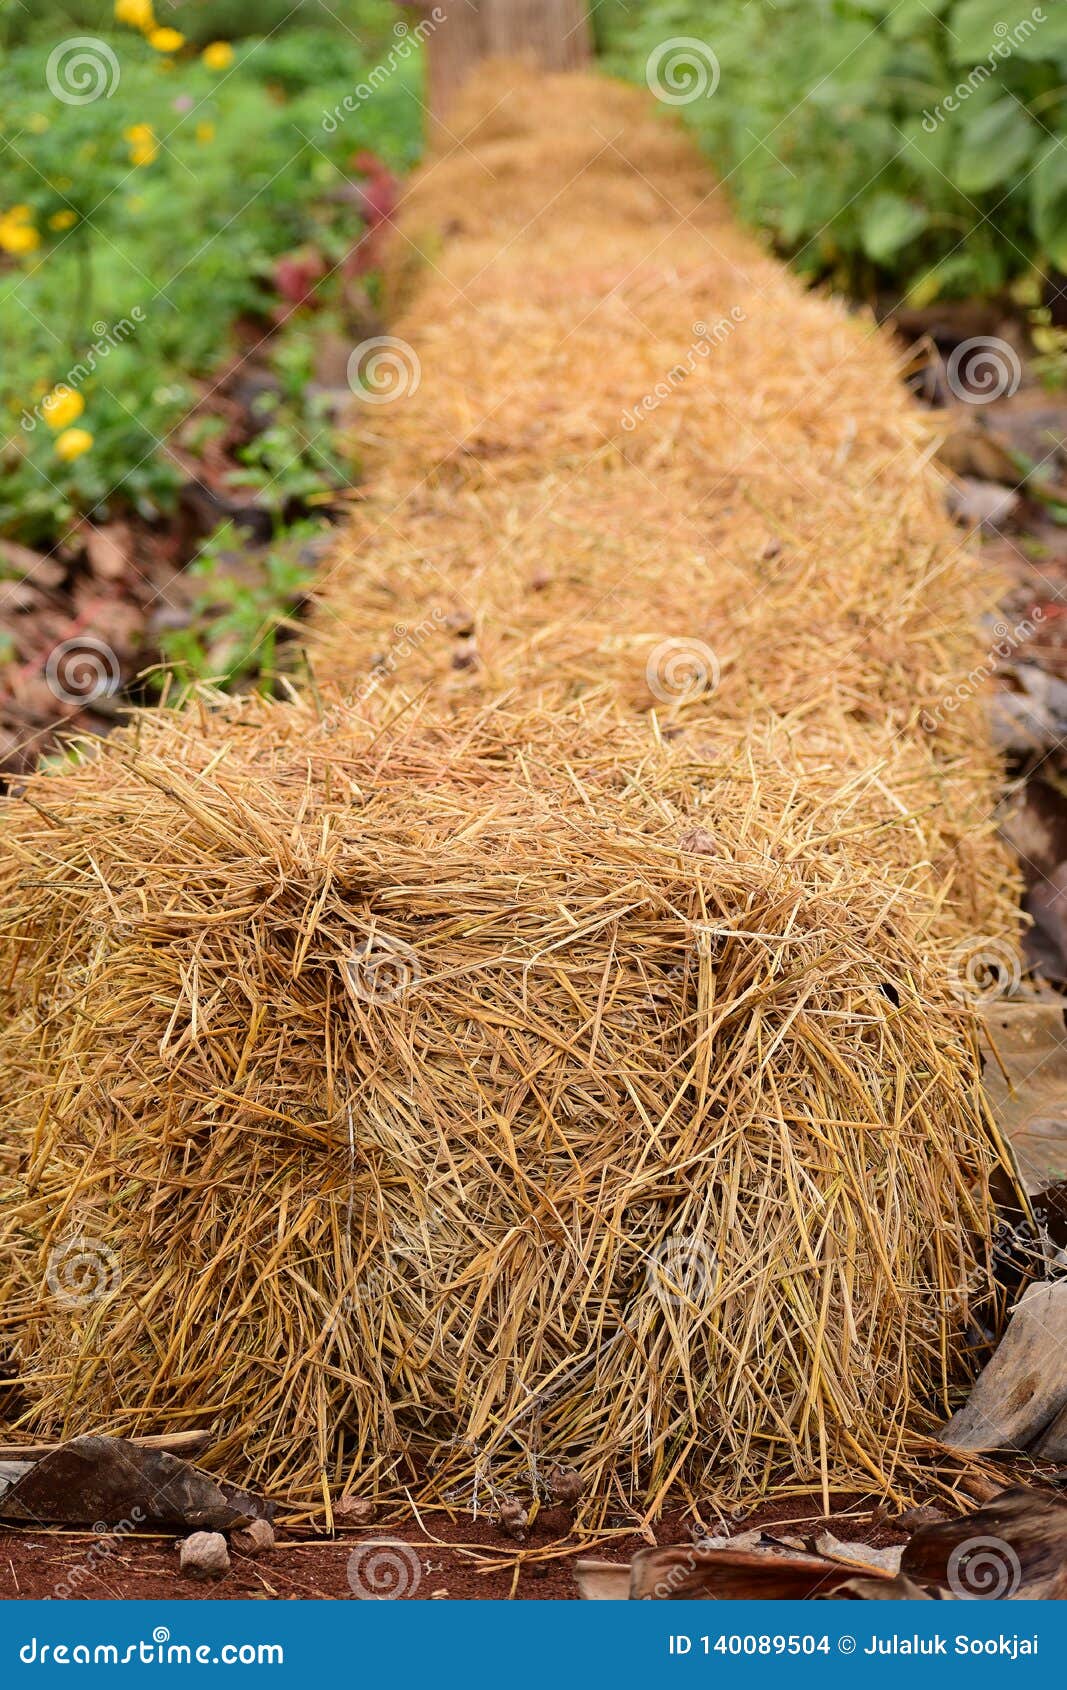 Hay Bale Stock Photo Image Of Outdoor Growth Natural 140089504